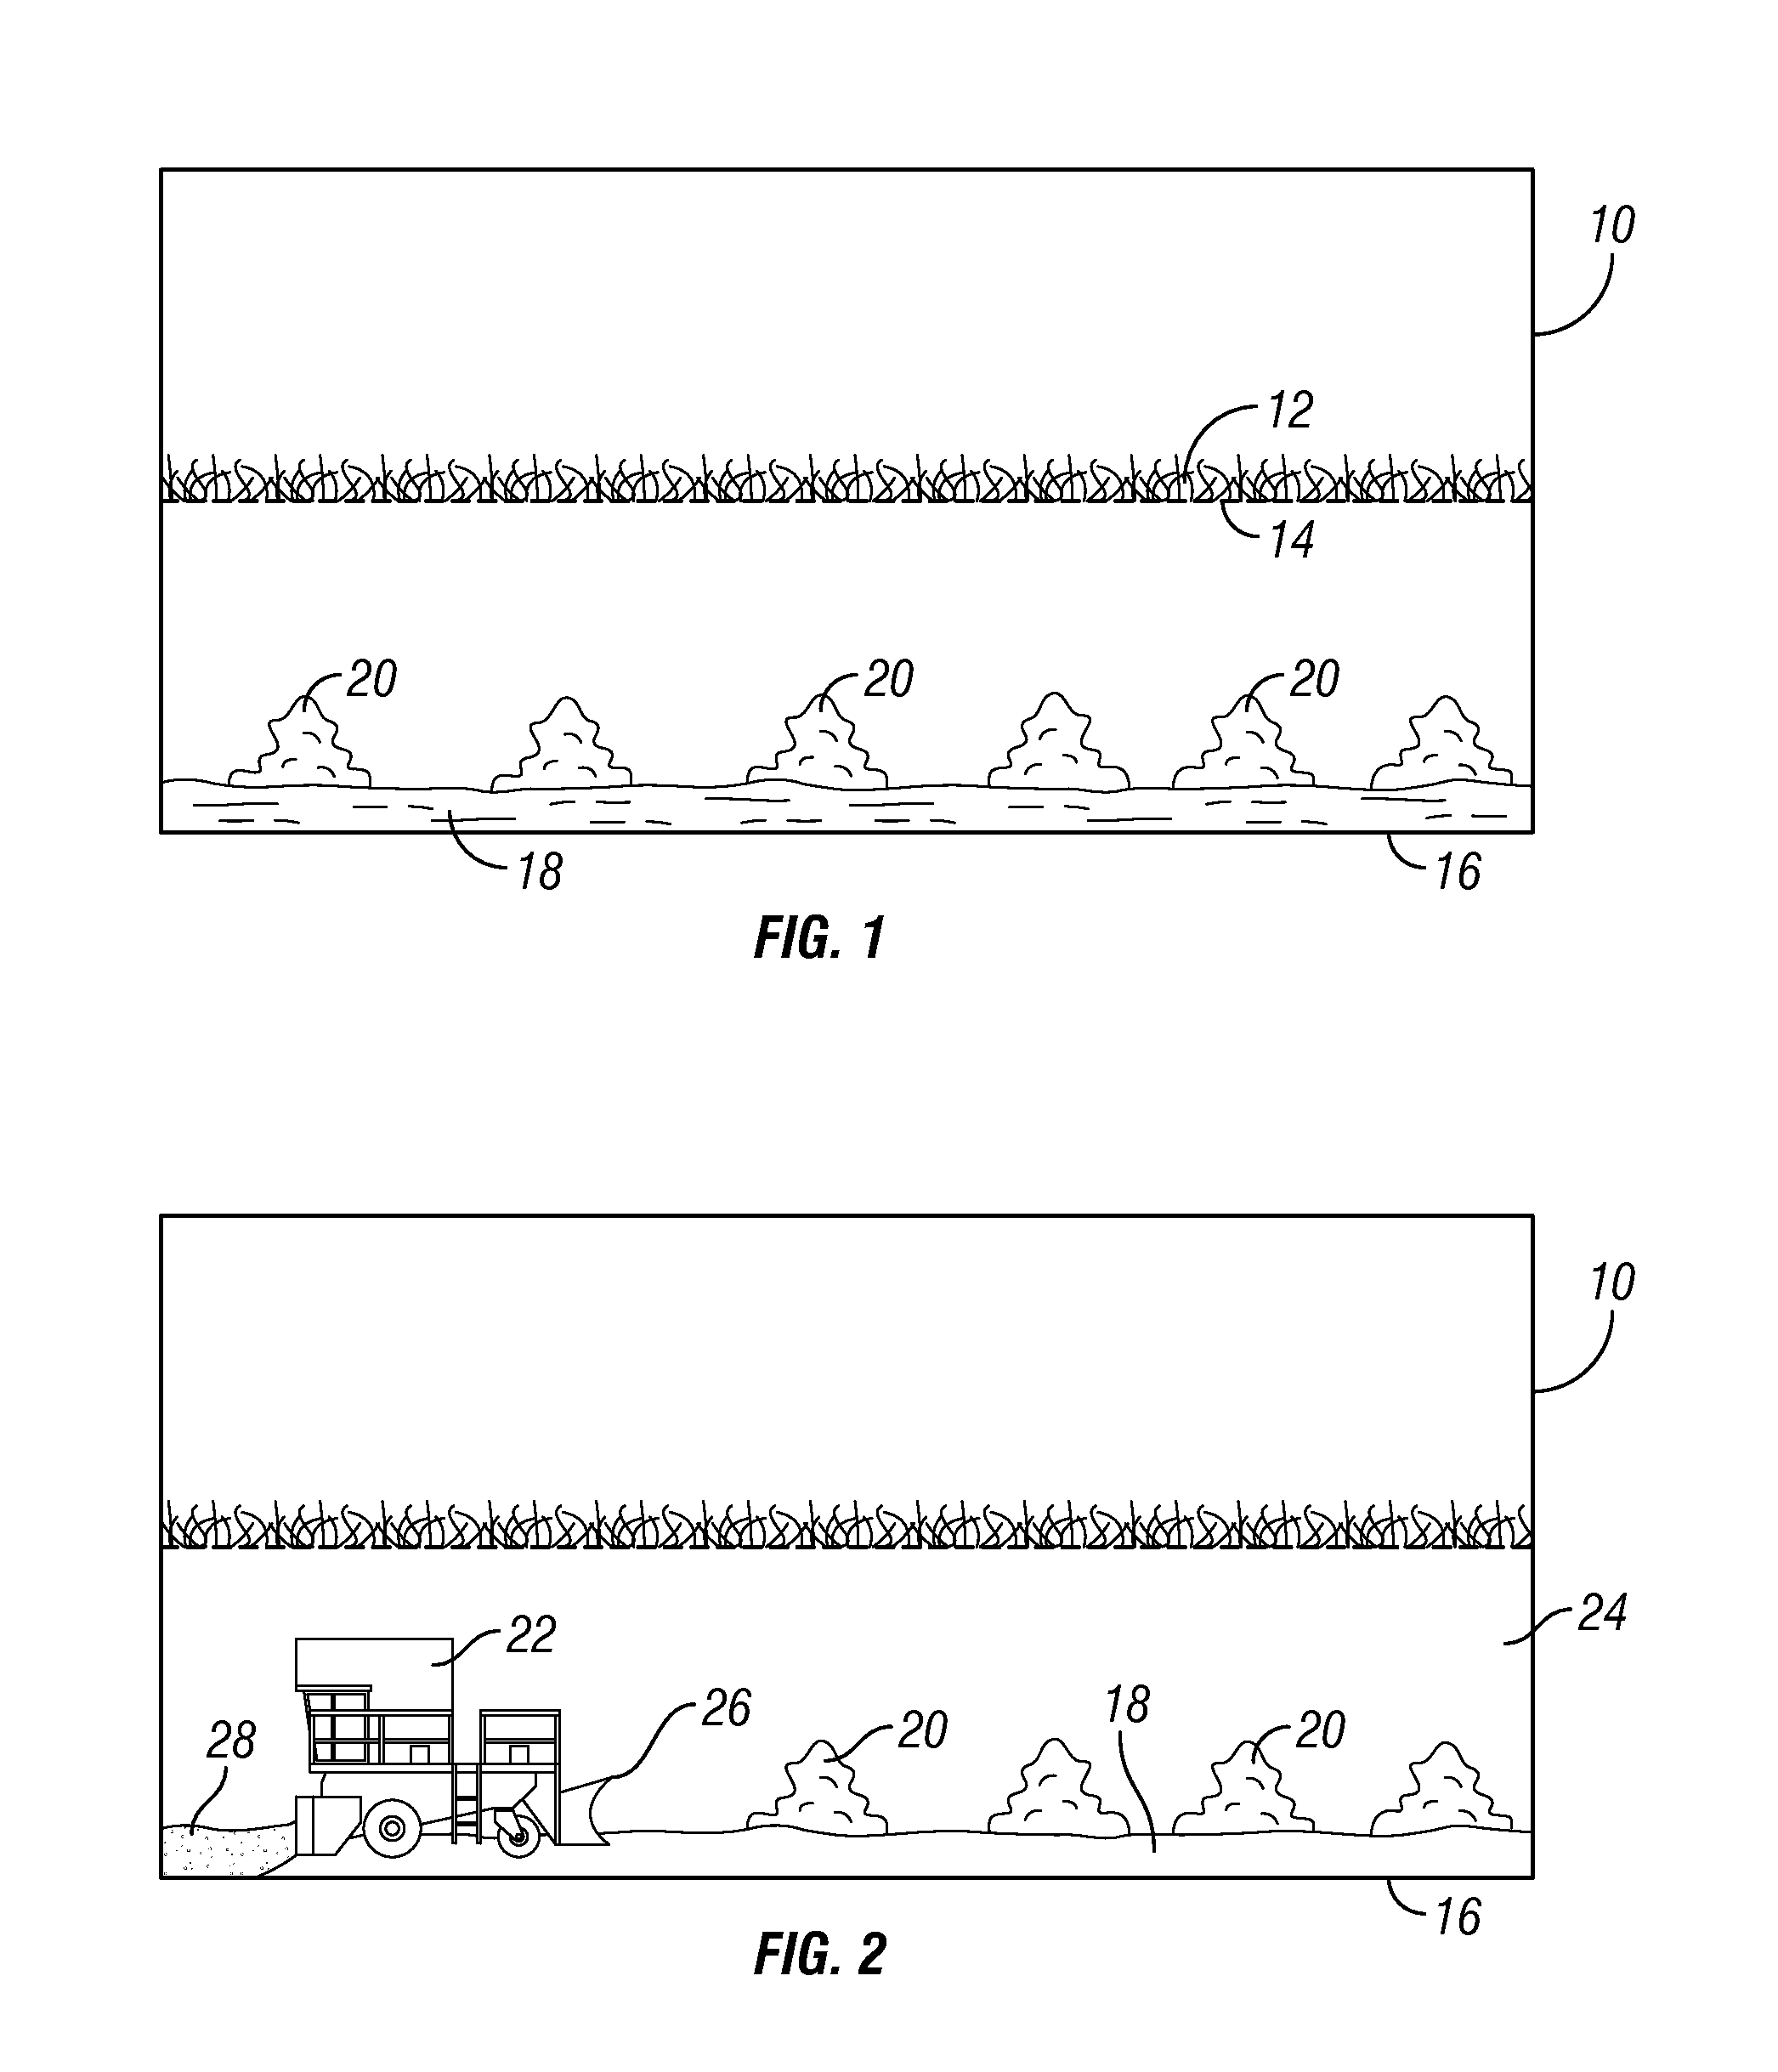 Methods of Treating Waste from a Chicken House using Short Paper Fibers